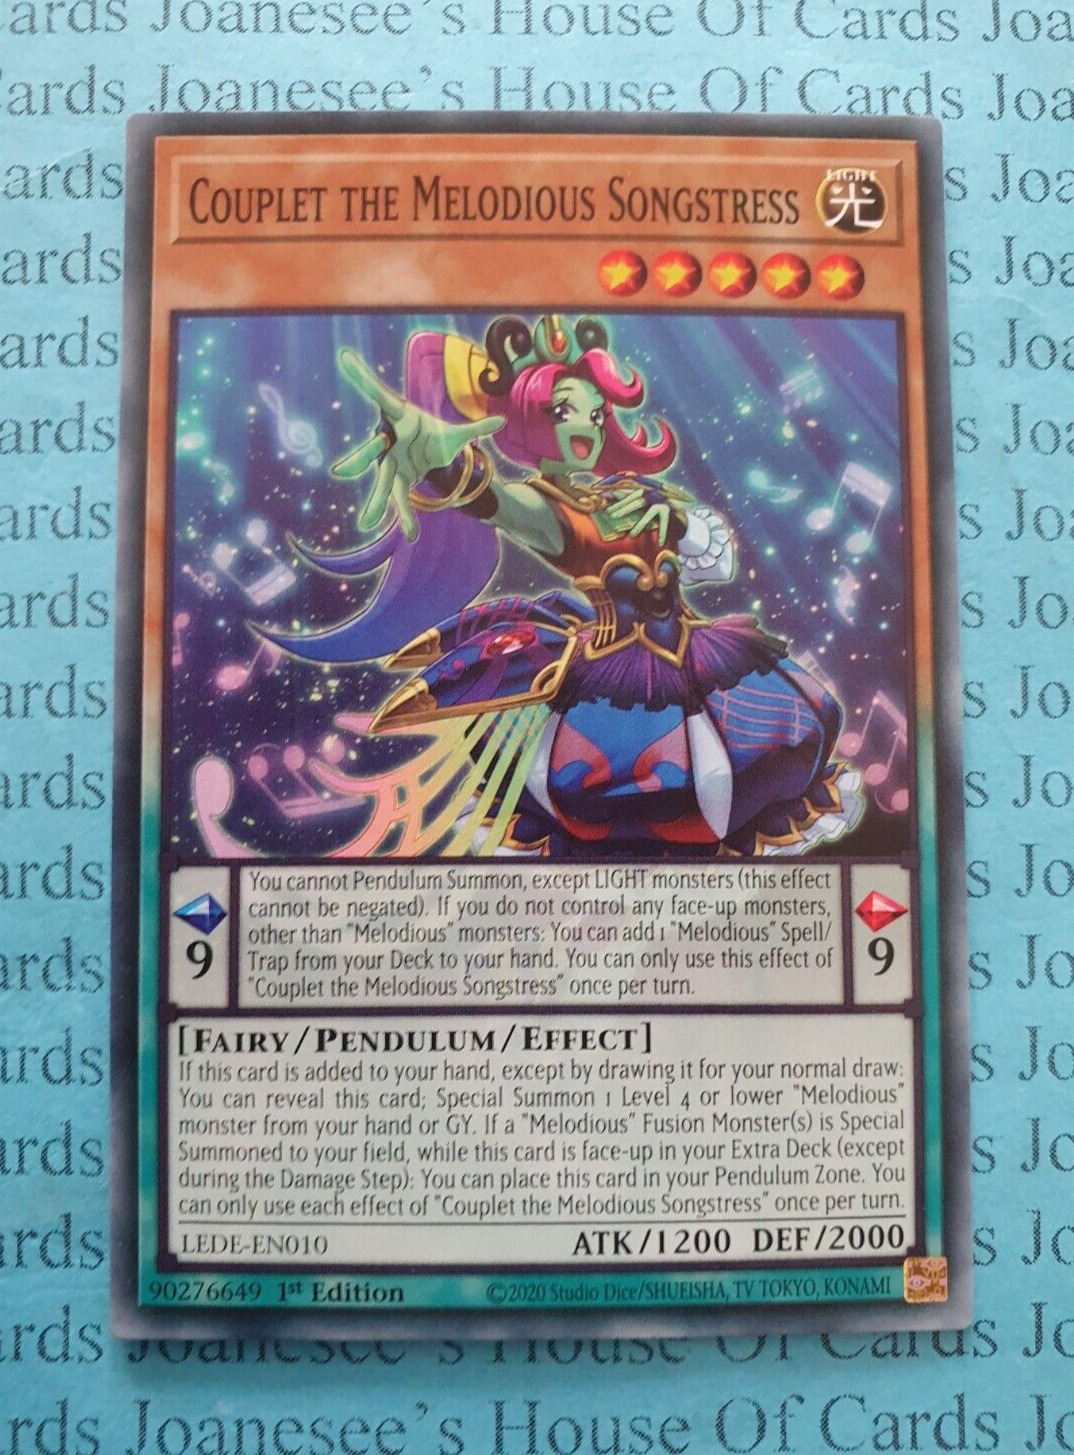 LEDE-EN010 Couplet the Melodious Songstress Yu-Gi-Oh Card 1st Edition New